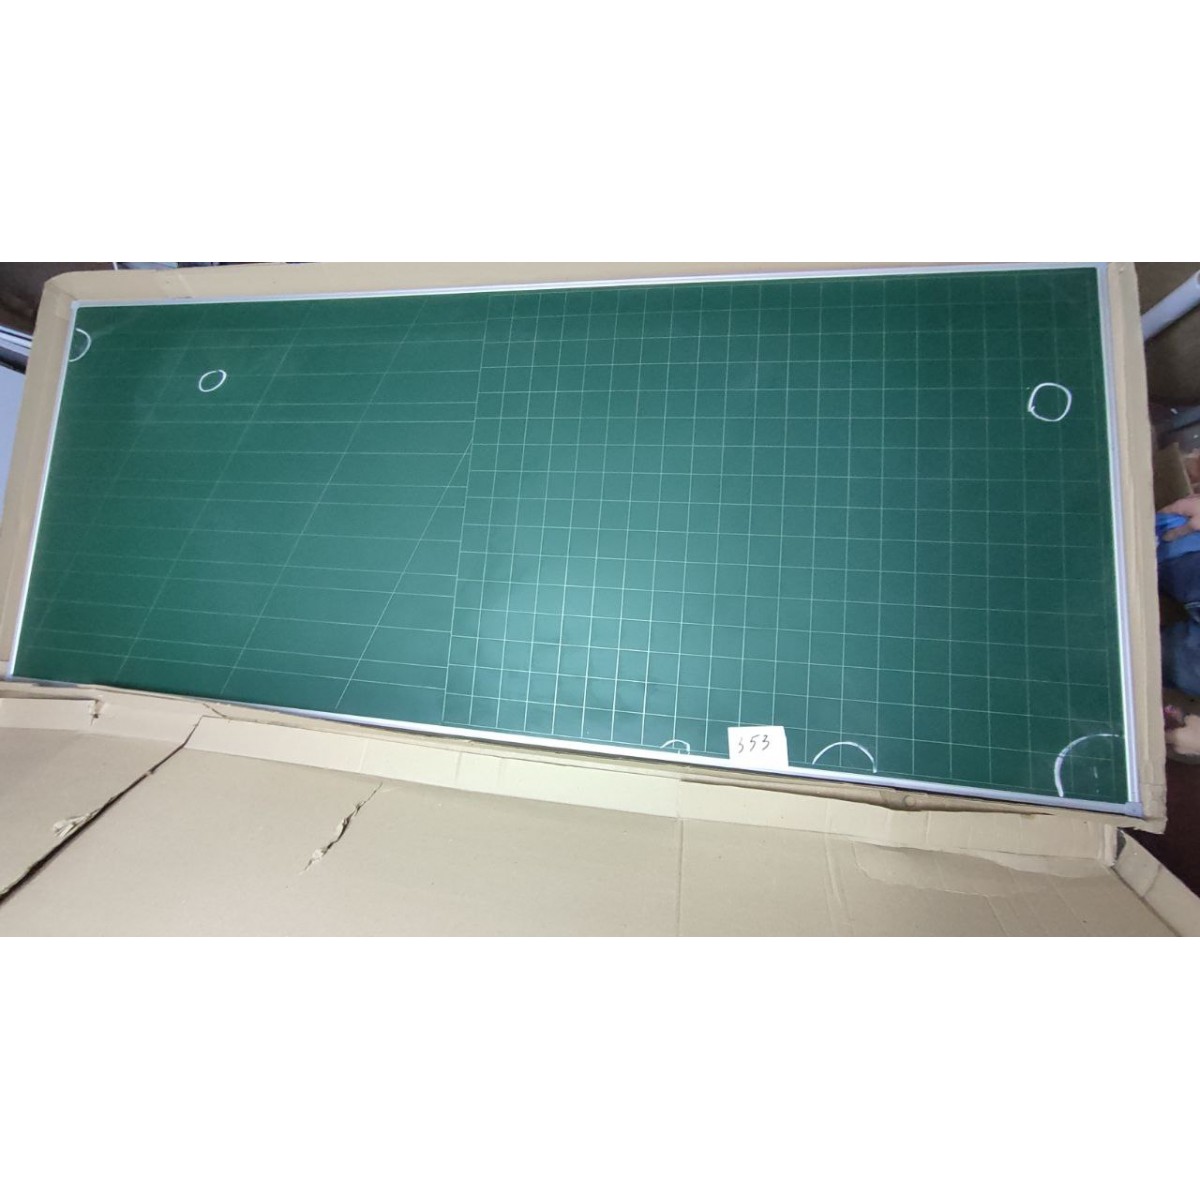 Lot No. 353 Board green 2400x1000 mm Standard with charting